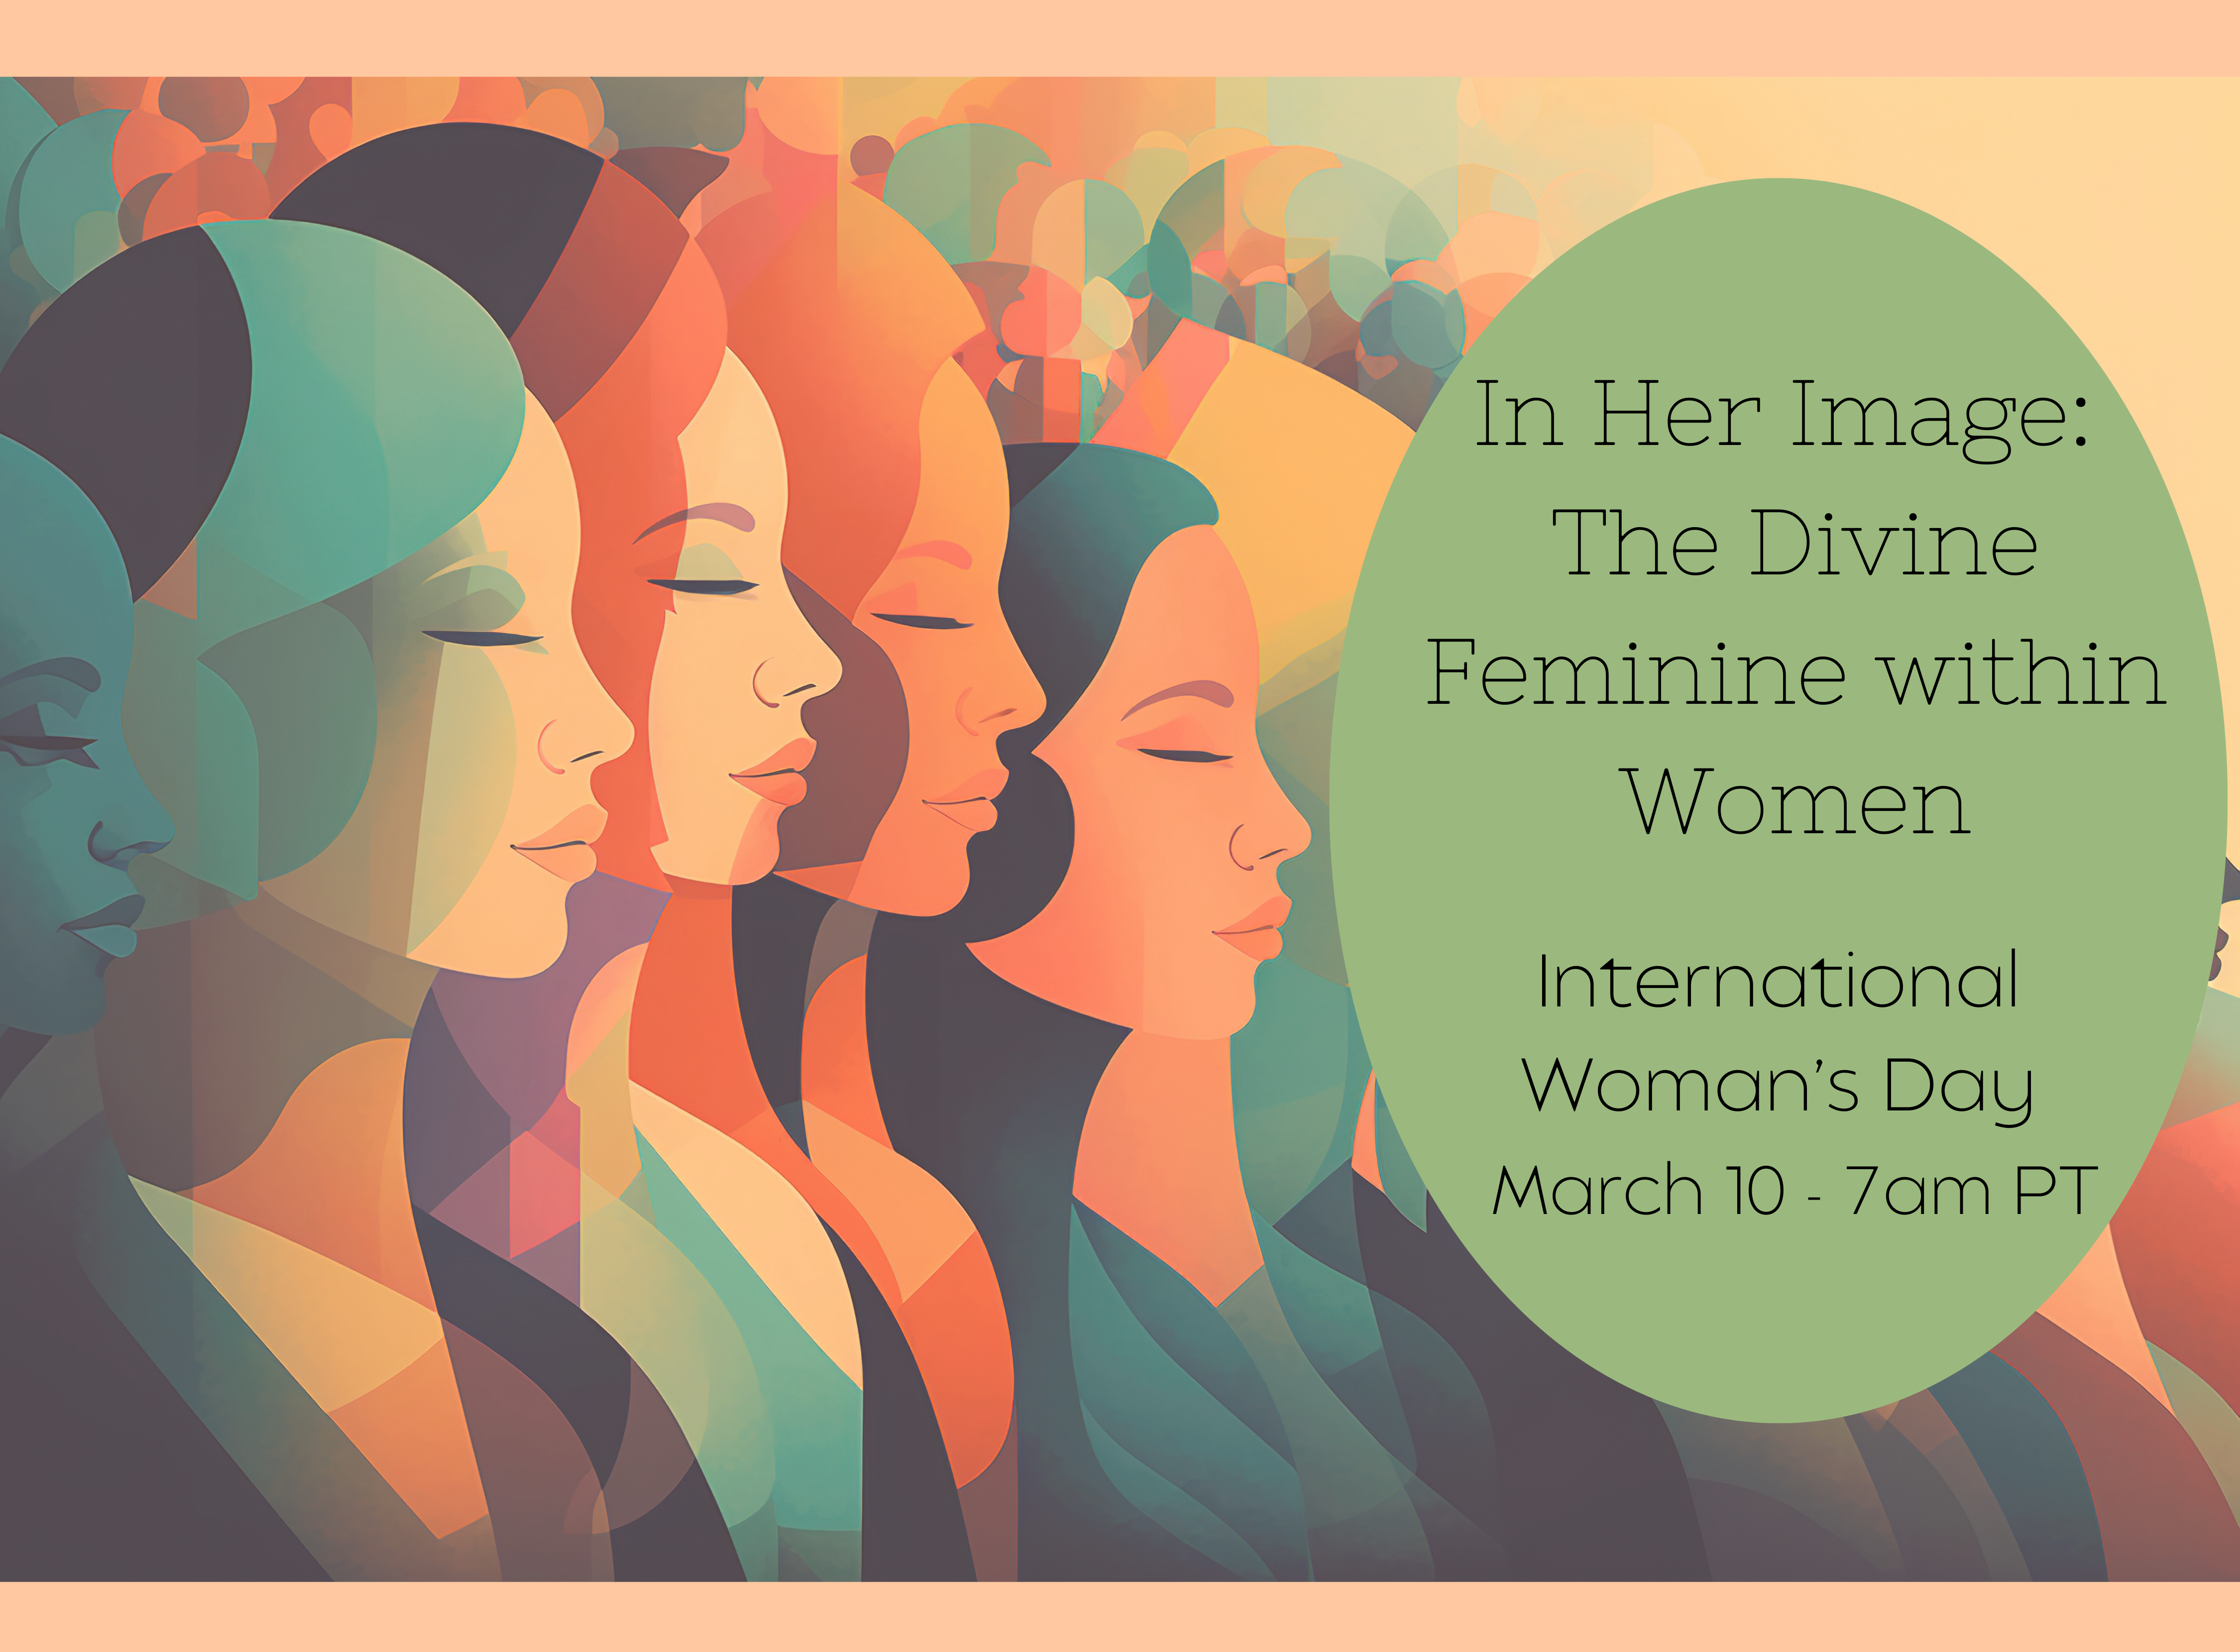 In Her Image: The Divine Feminine within Women